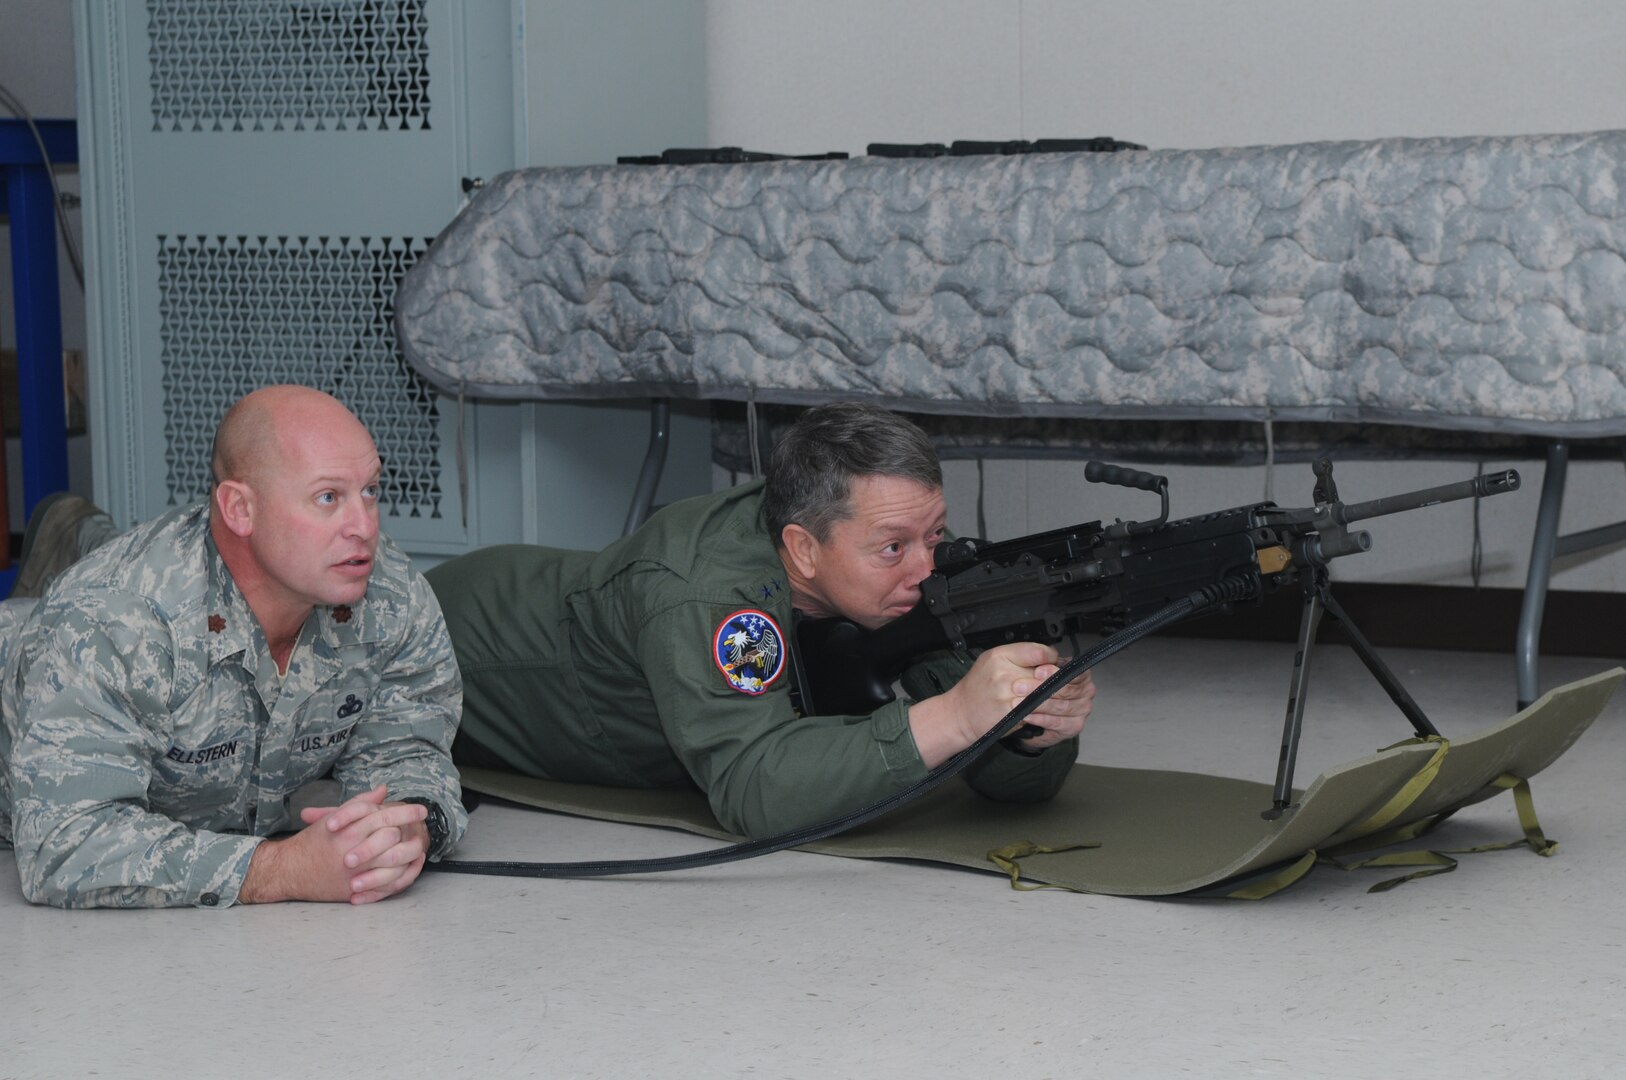 Maj. Gen. Gregory Feest (right) 19th Air Force commander, practices his aim as Maj. Frank Hellstern, 12th Security Forces Squadron commander, watches. General Feest visited several areas of the 12th Flying Training Wing Jan. 29-30 to learn more about the wing and its Airmen. (U.S. Air Force photo by Joel Martinez)